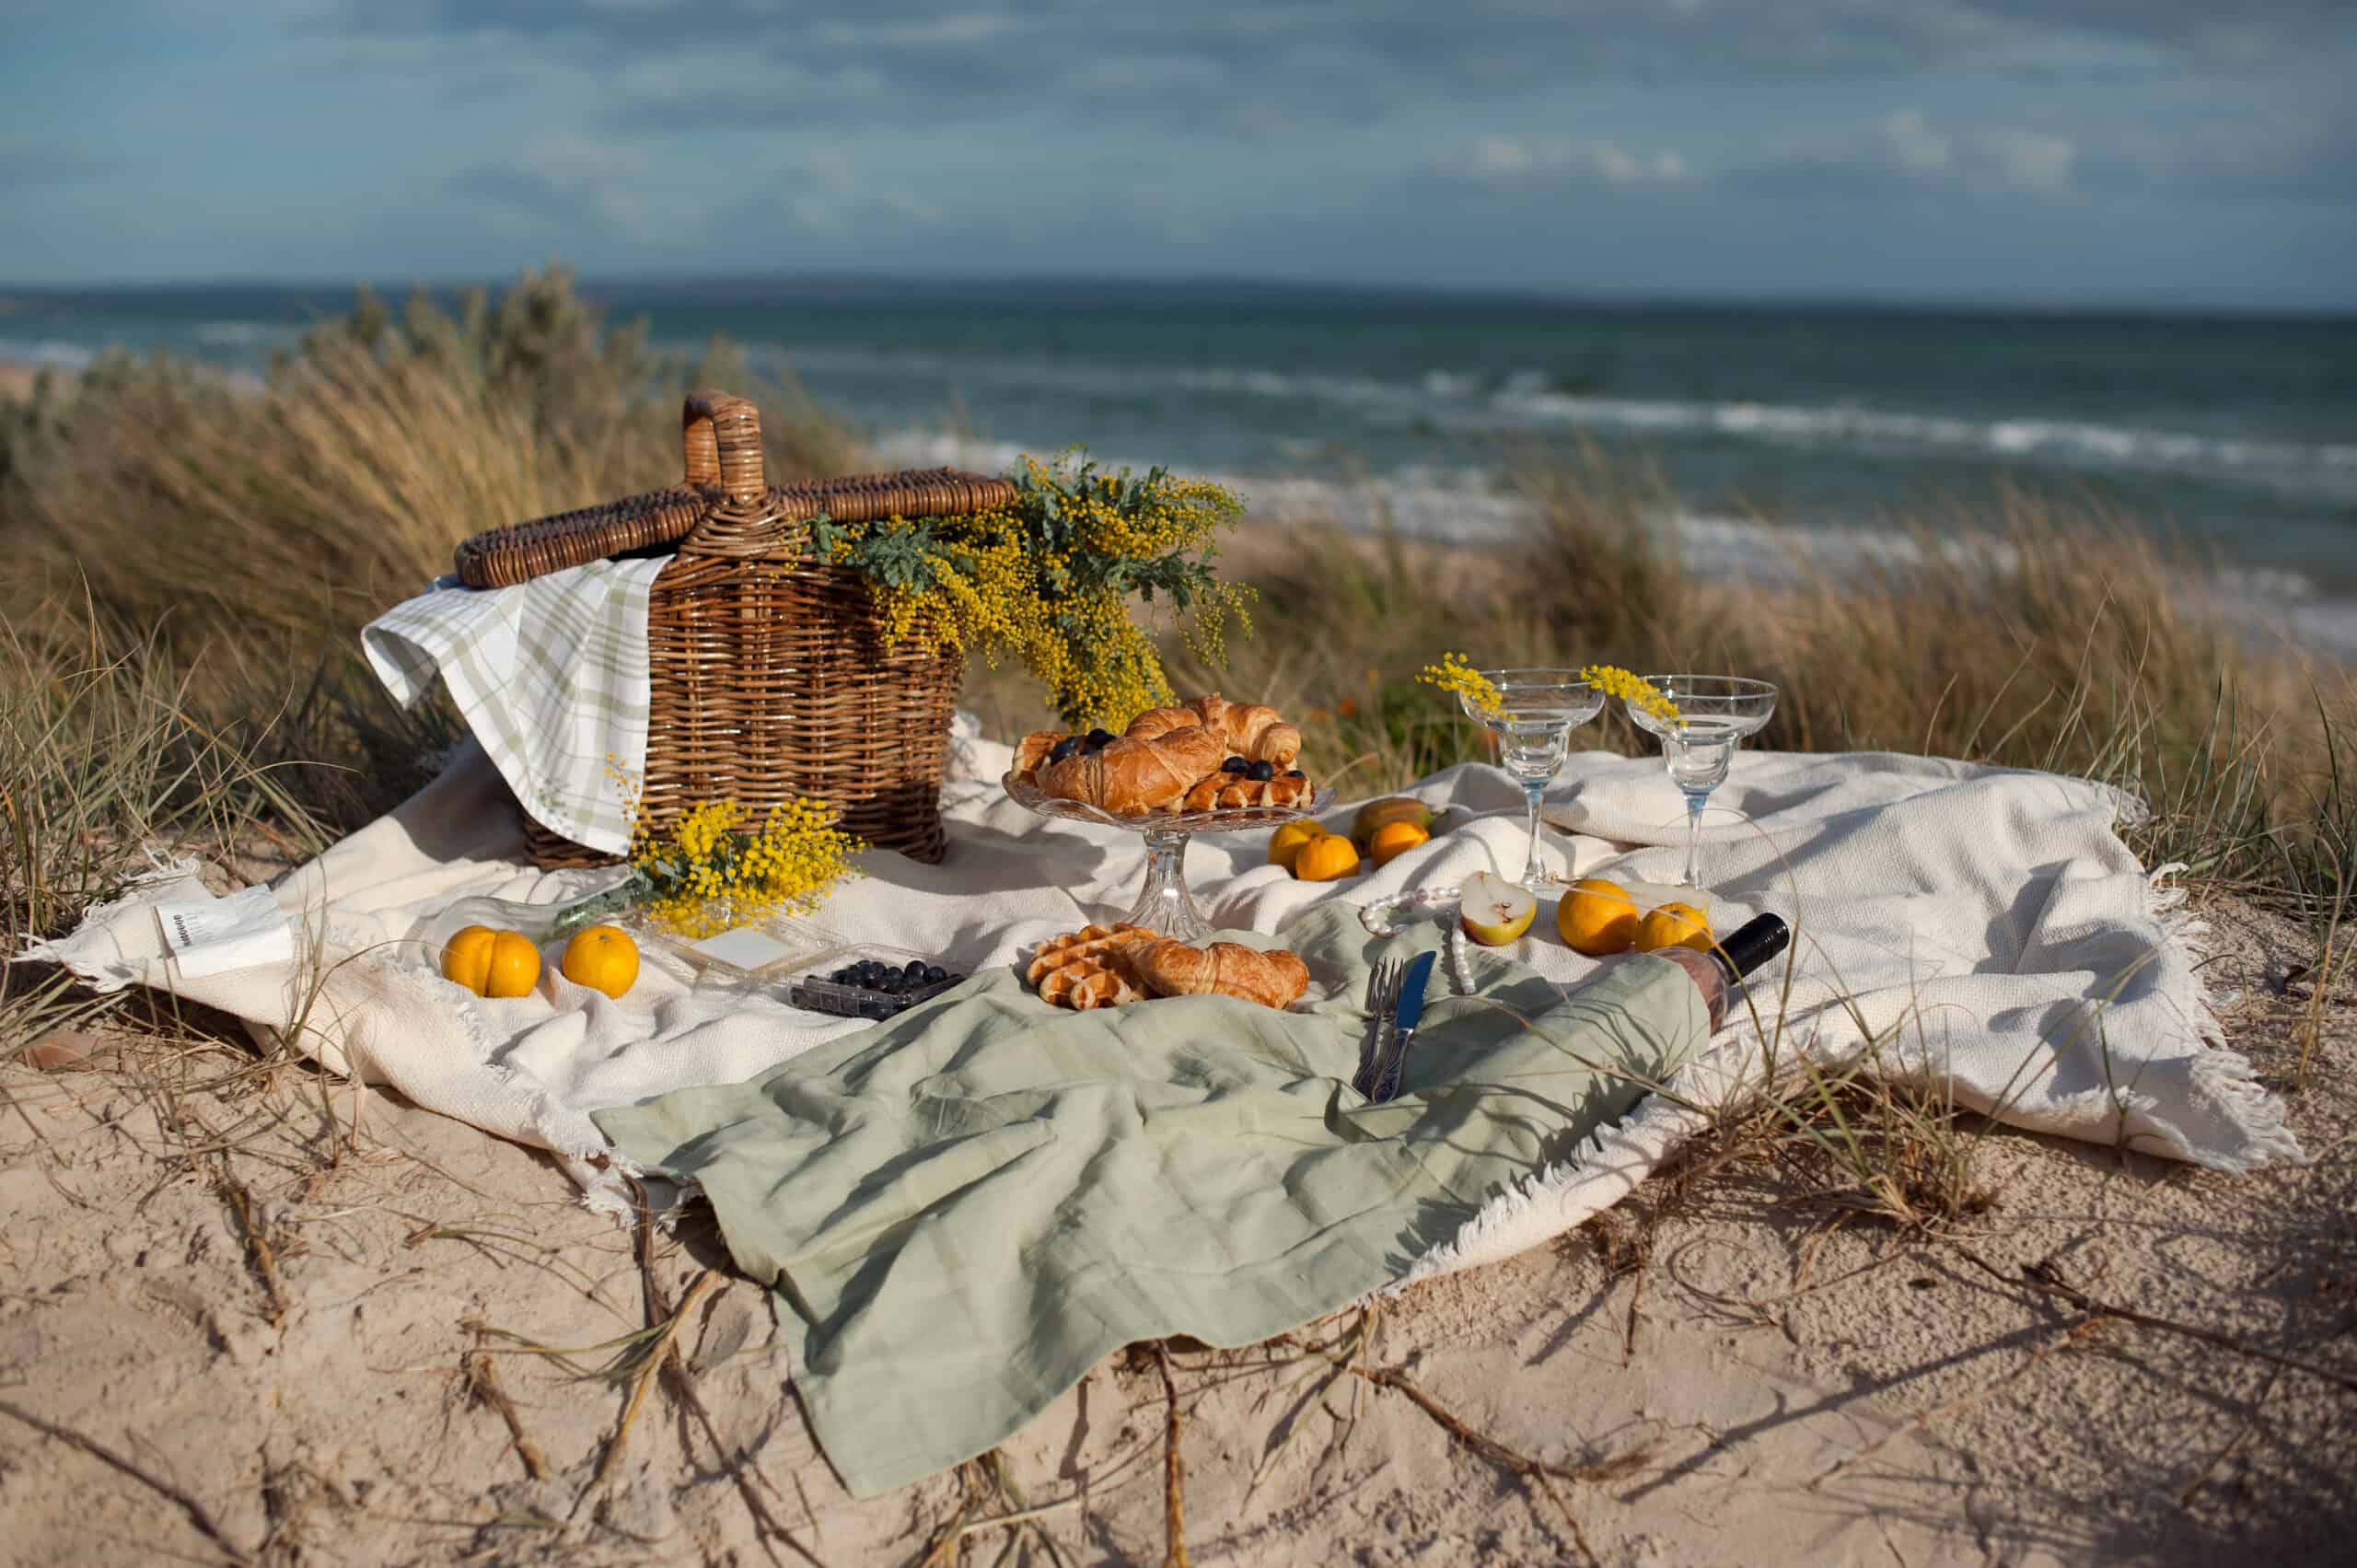 Annual Institute set for June 2022 at Amelia Island—a Food Lover’s Dream